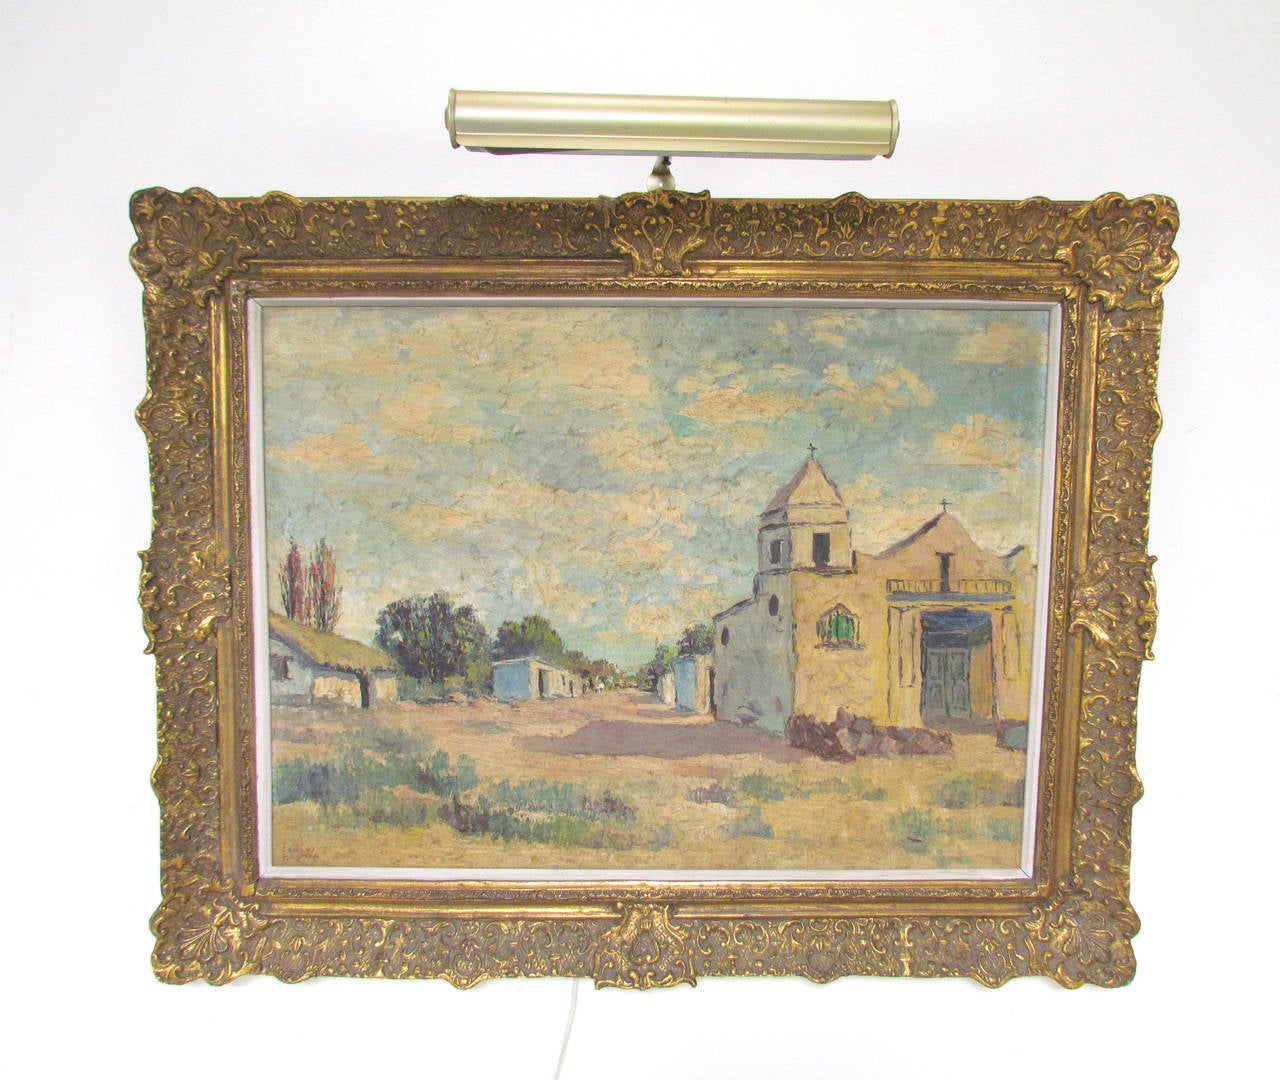 Striking palette knife oil painting of a village in Argentina, circa 1950s. Classically framed large-scale work depicting a Mission and street view by known Argentinian itinerant artist Carlos Brondo. Has an almost Southwestern flair.